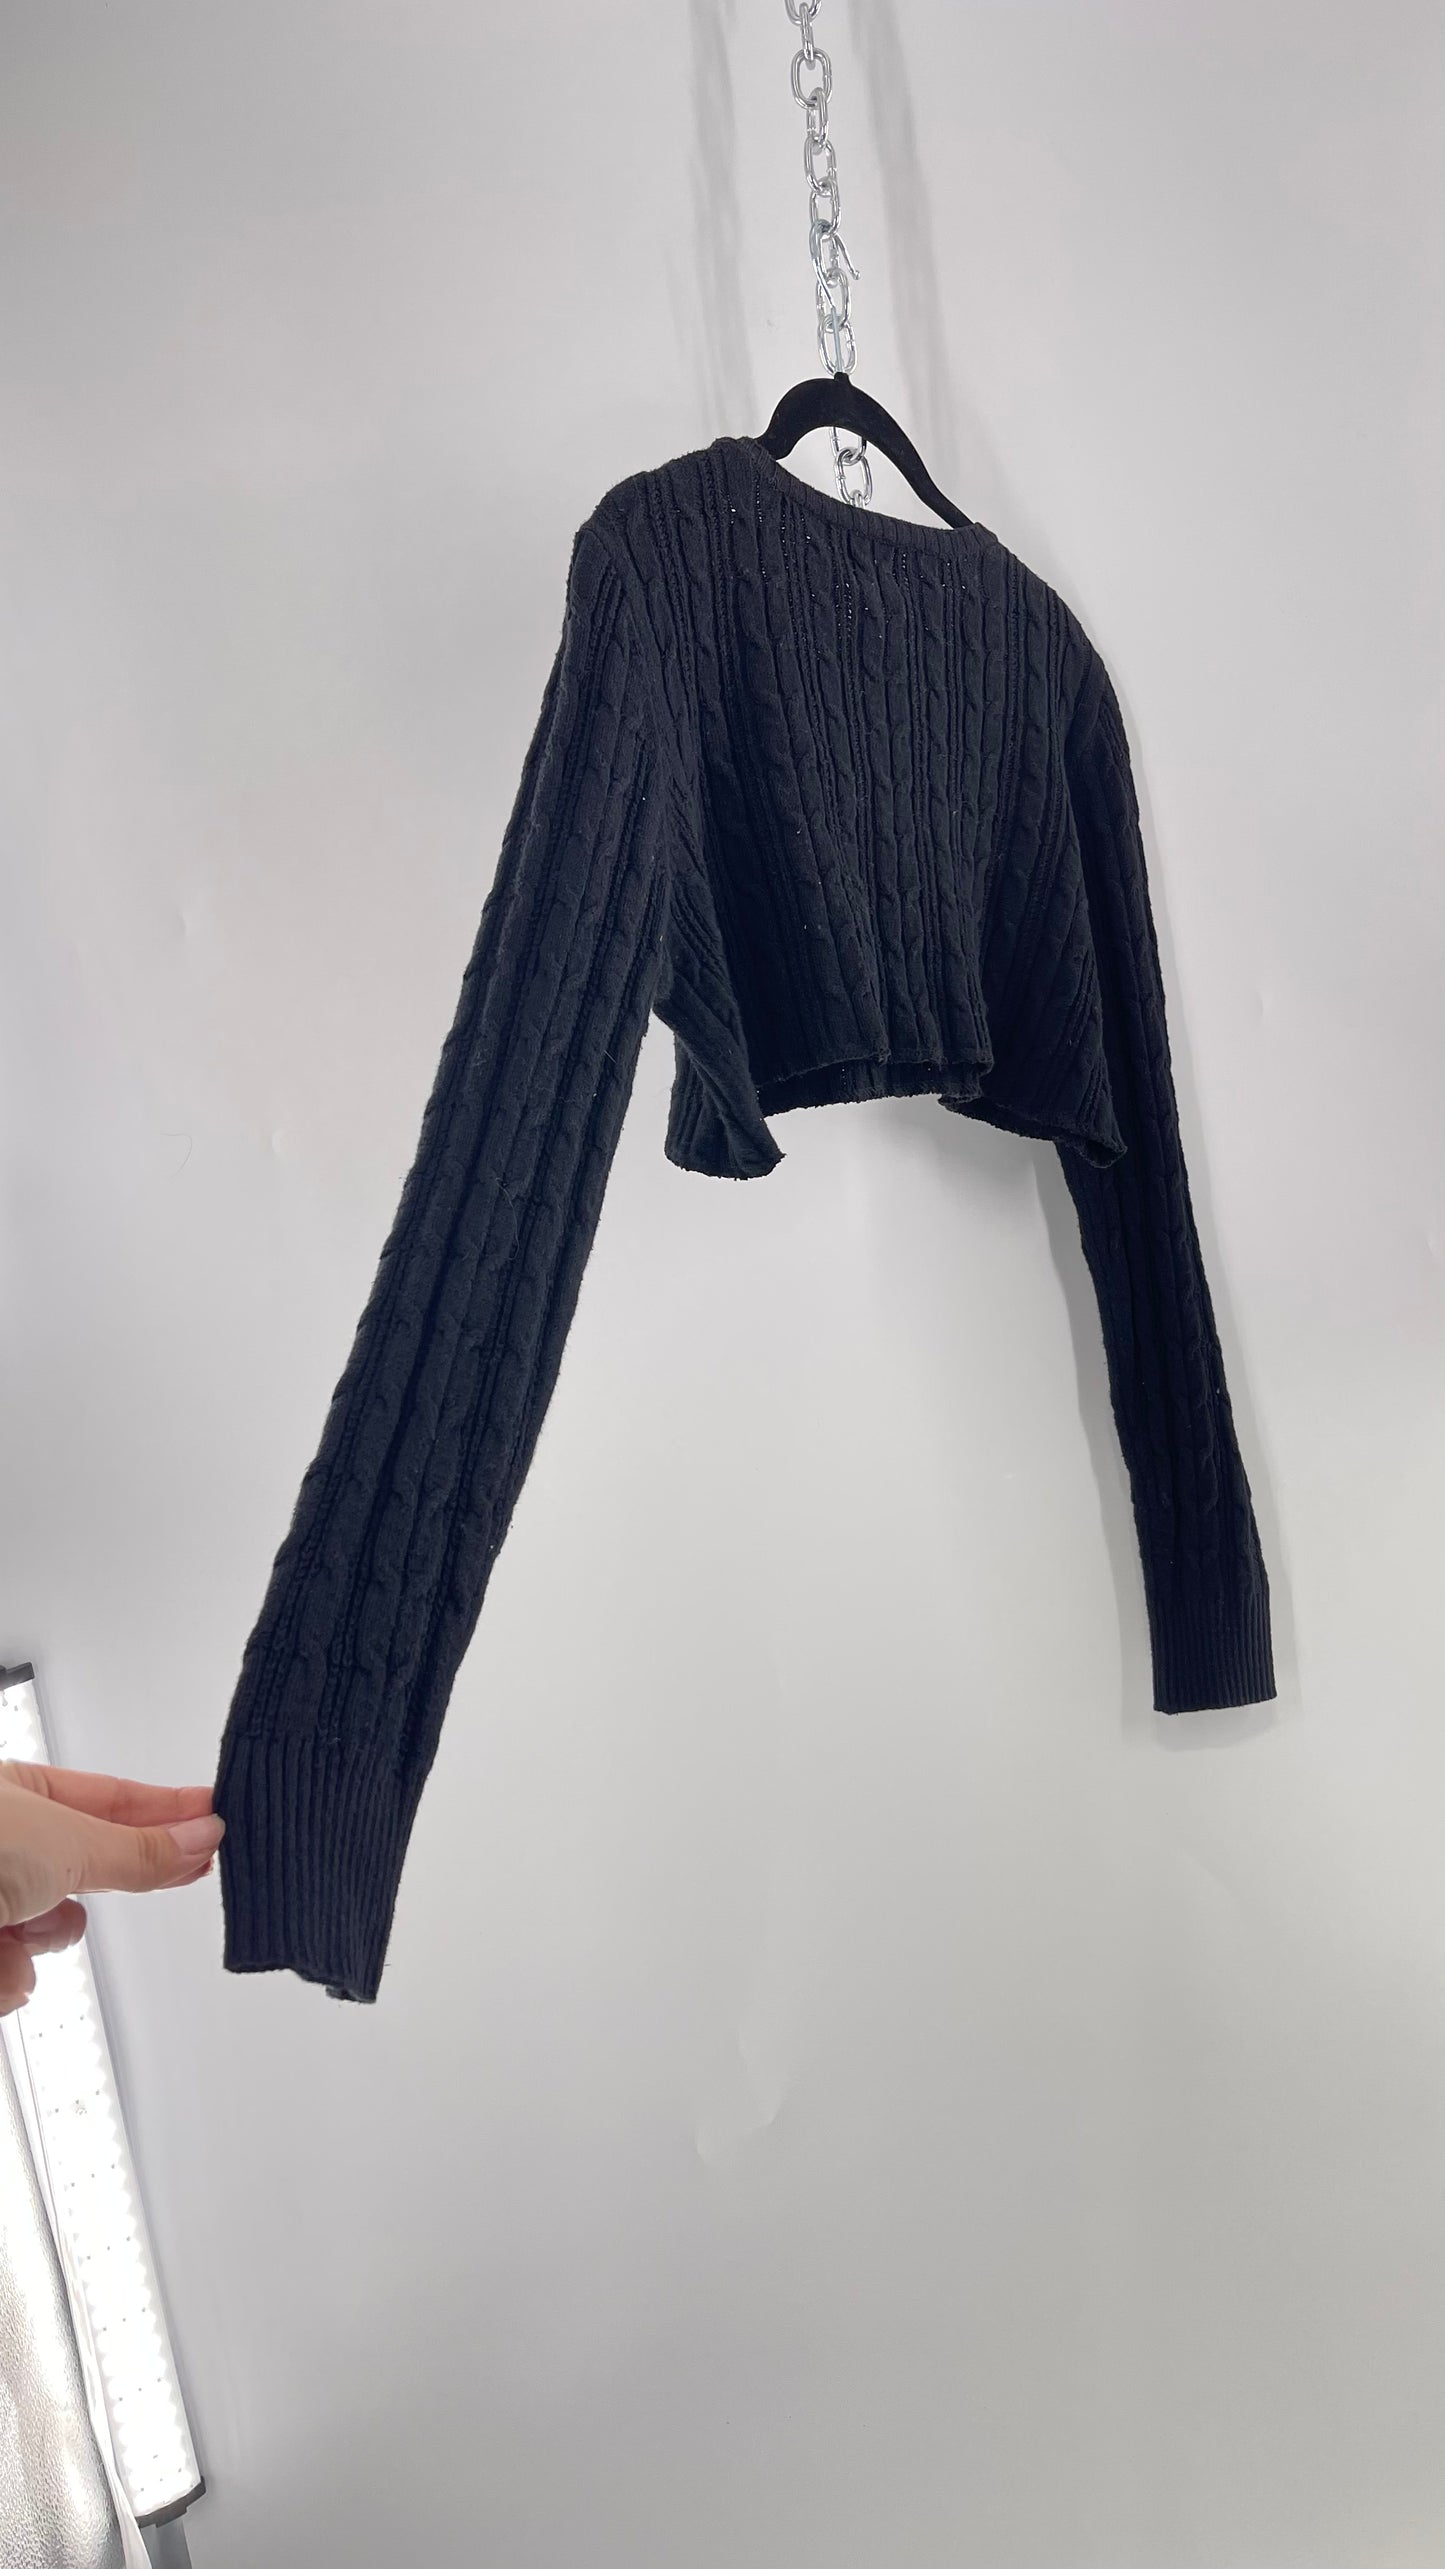 Urban Outfitters Reworked Cropped Cableknit Black Sweater (Medium)